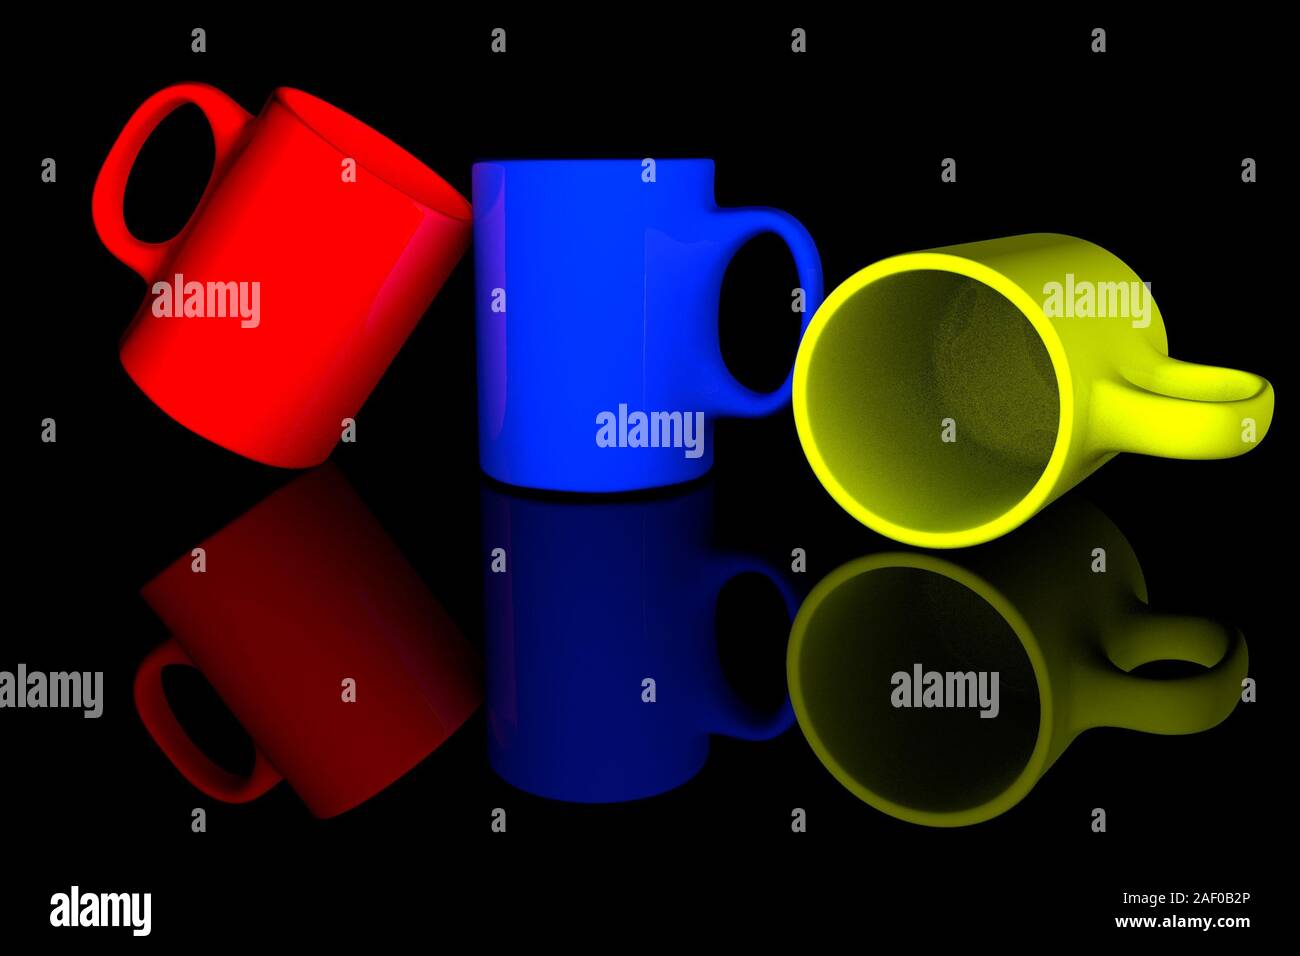 3D render of three coffee mugs isolated on solid color background Stock Photo